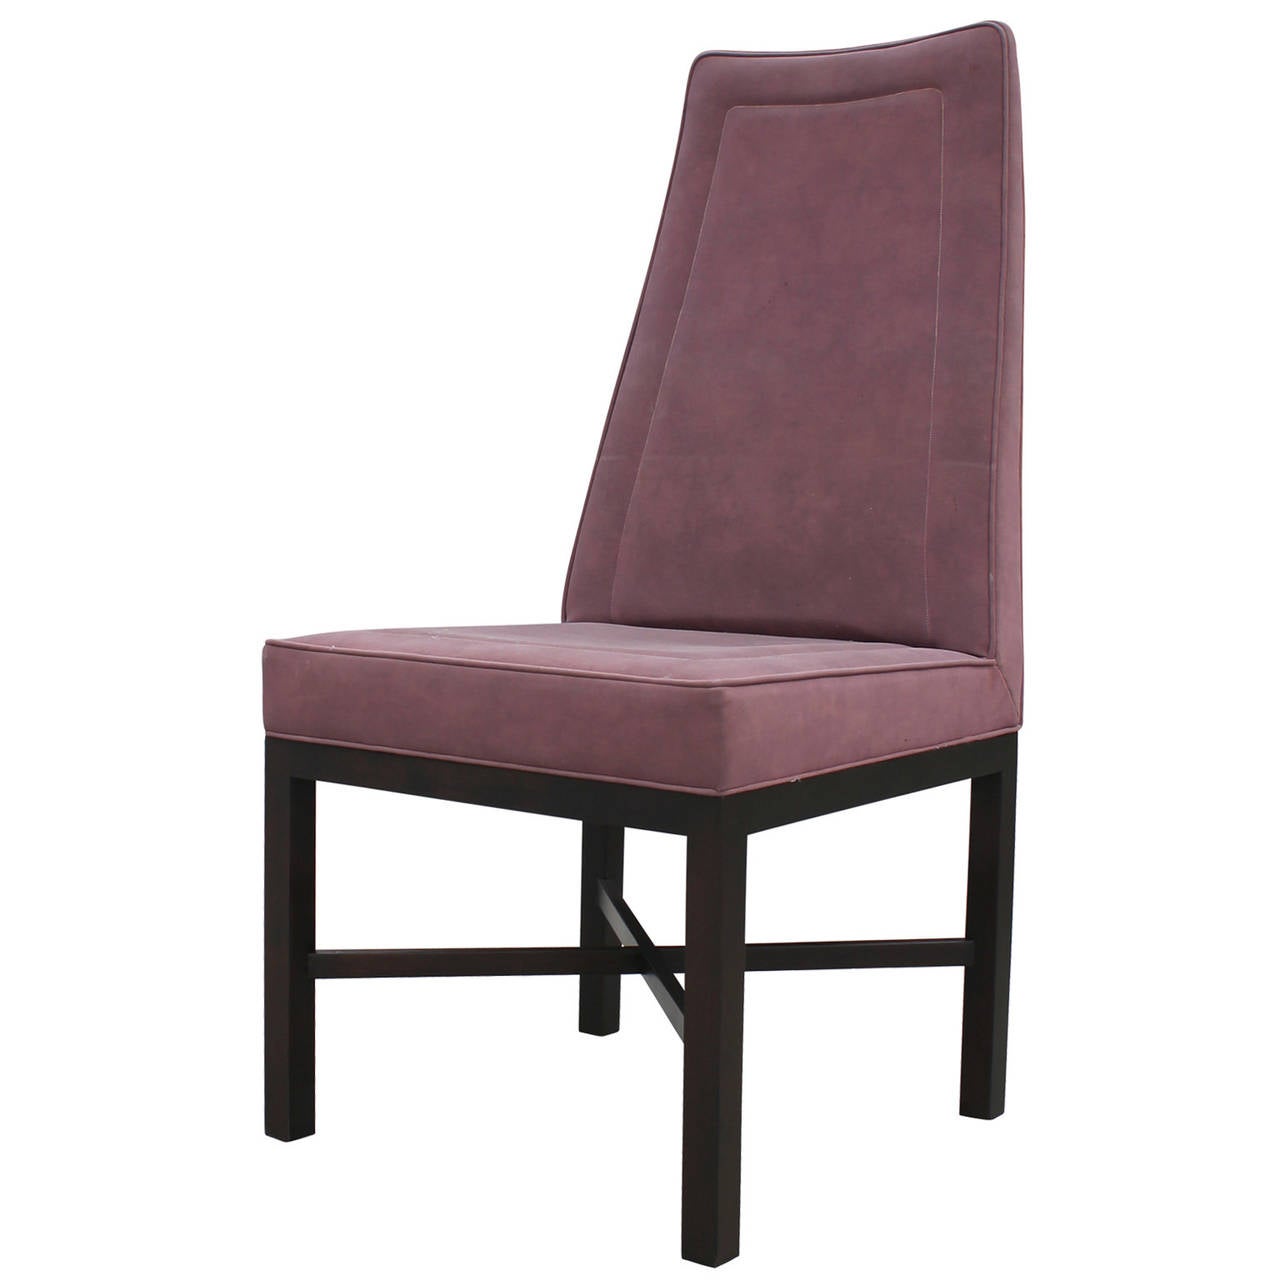 Set of six dining chairs with original purple suede upholstery dining chairs by Edward Wormley for Dunbar. Reupholstery or professional cleaning recommended. Bases are in excellent condition.